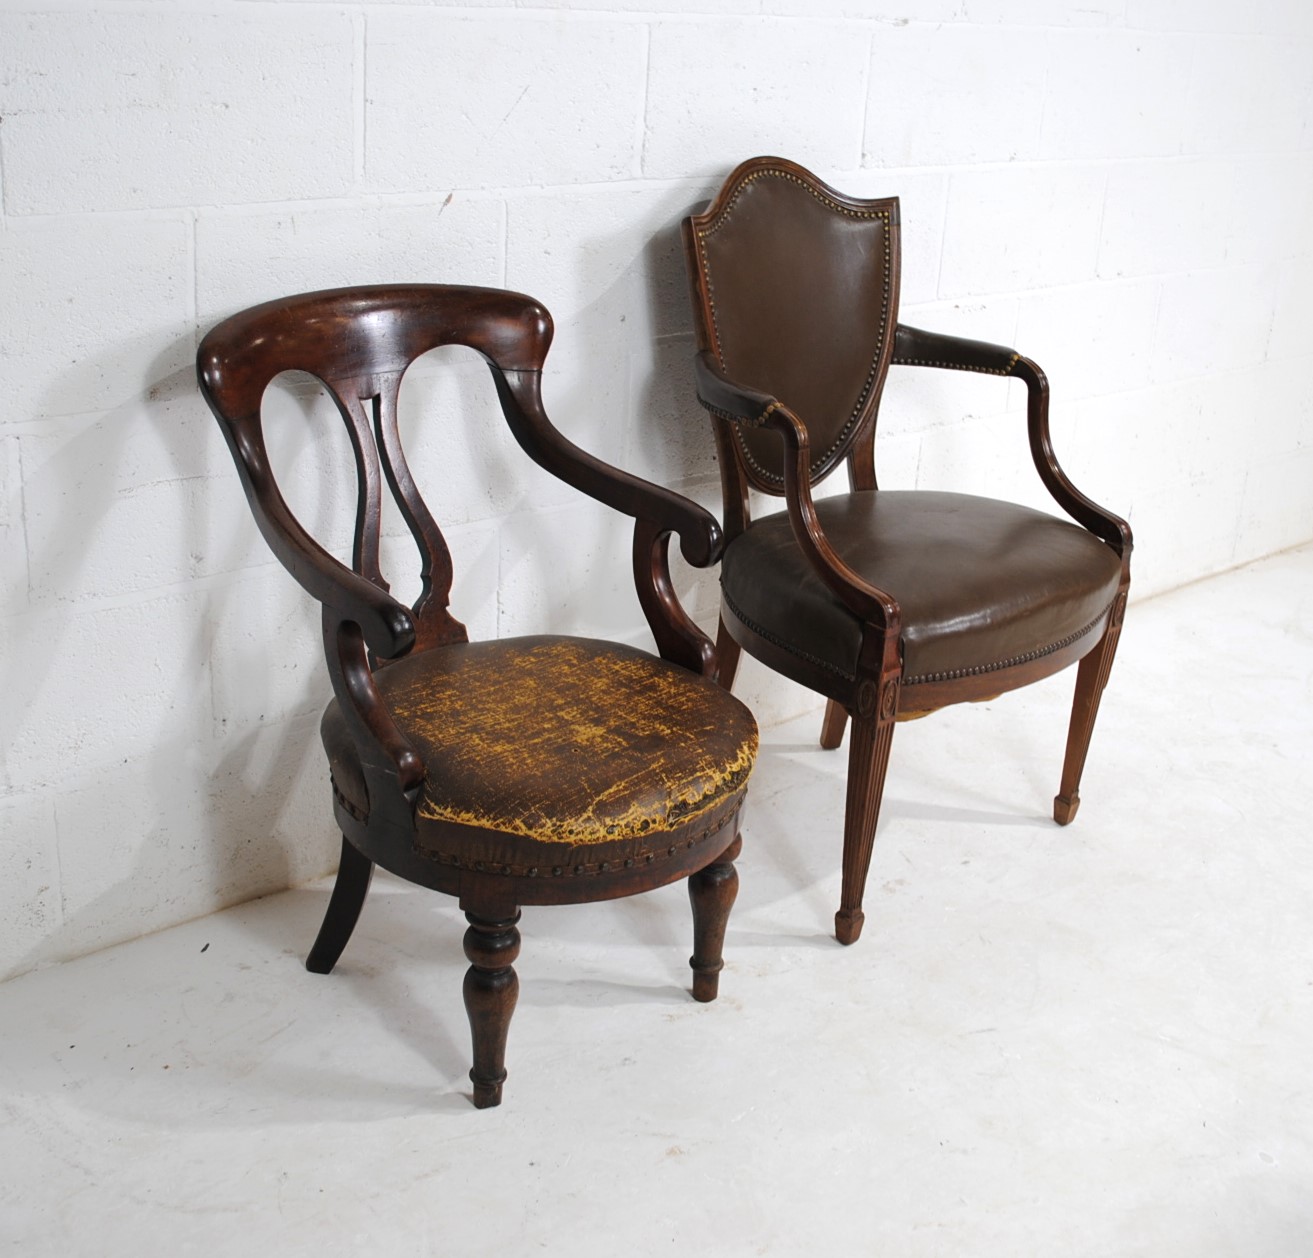 A Victorian mahogany chair, along with an antique mahogany upholstered shield back chair - Image 2 of 3